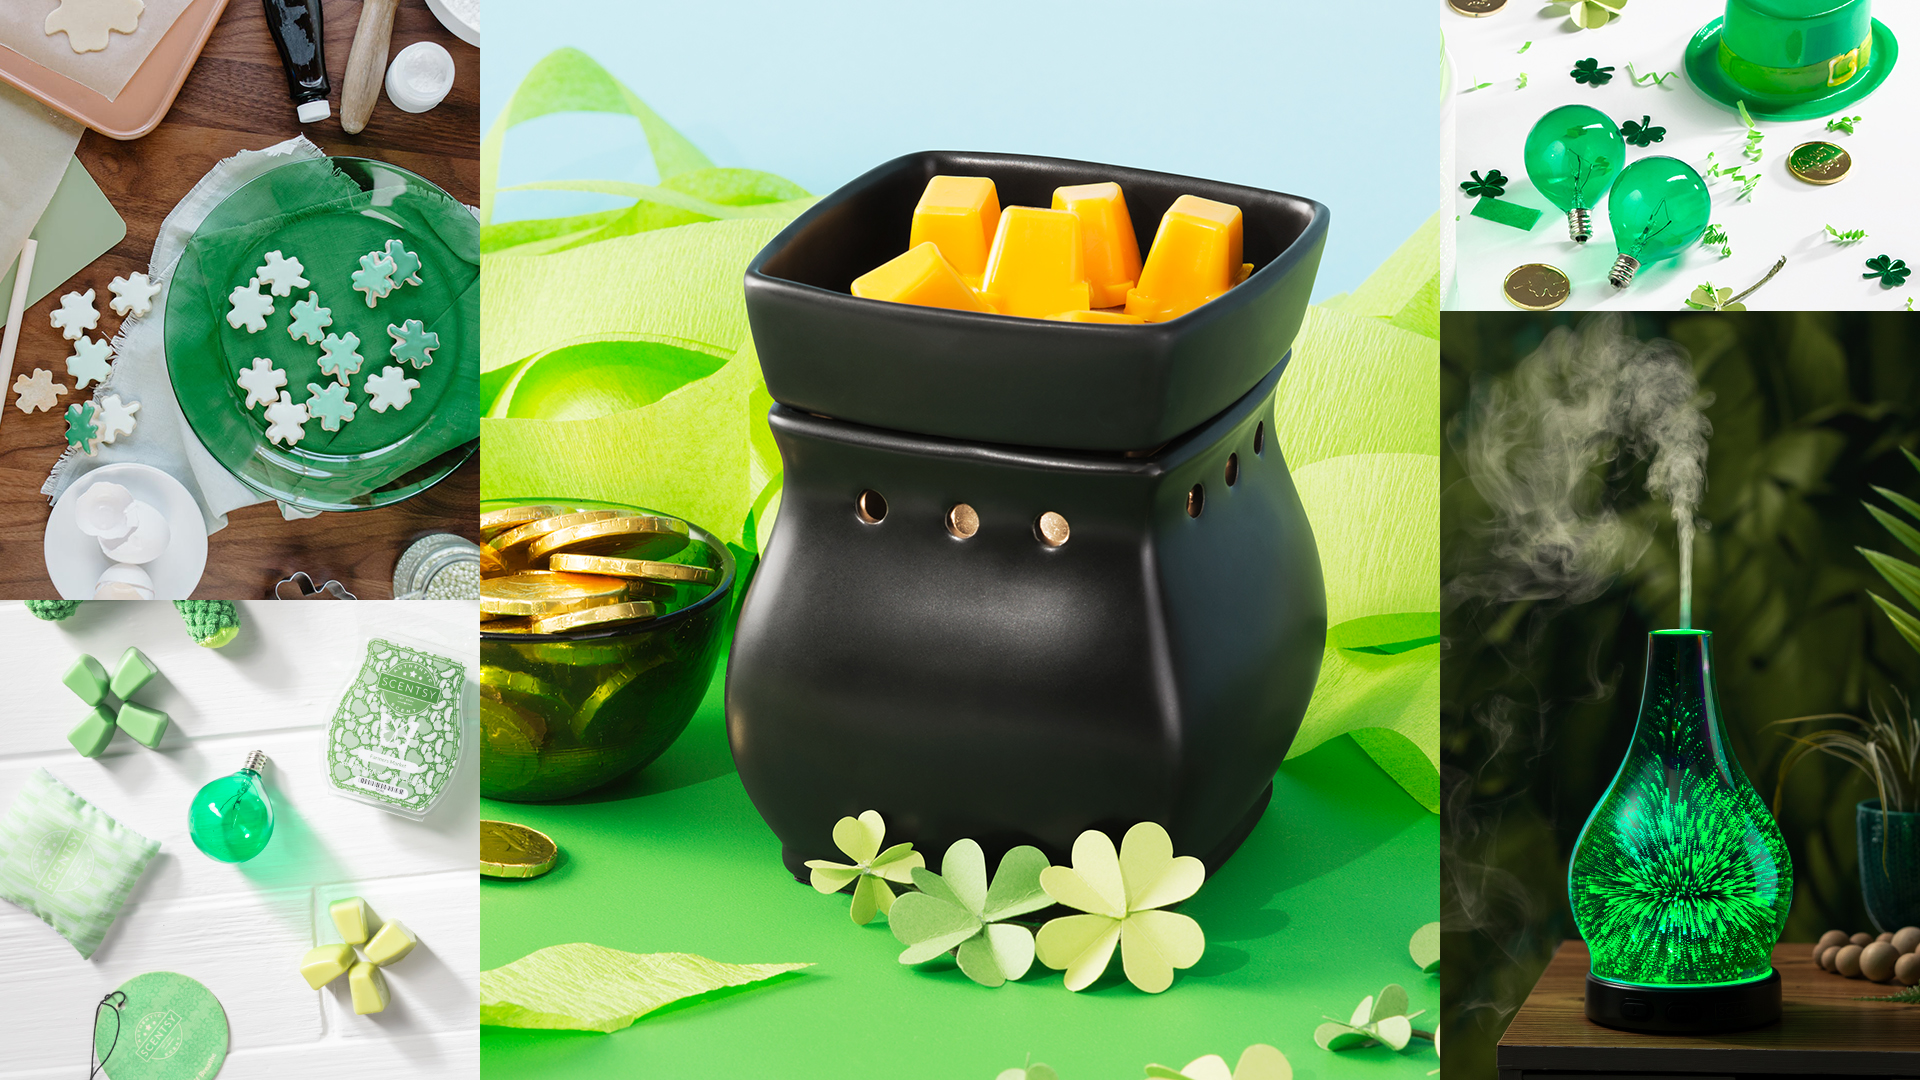 St. Patrick’s Day activities and Scentsy fragrance for the lucky day